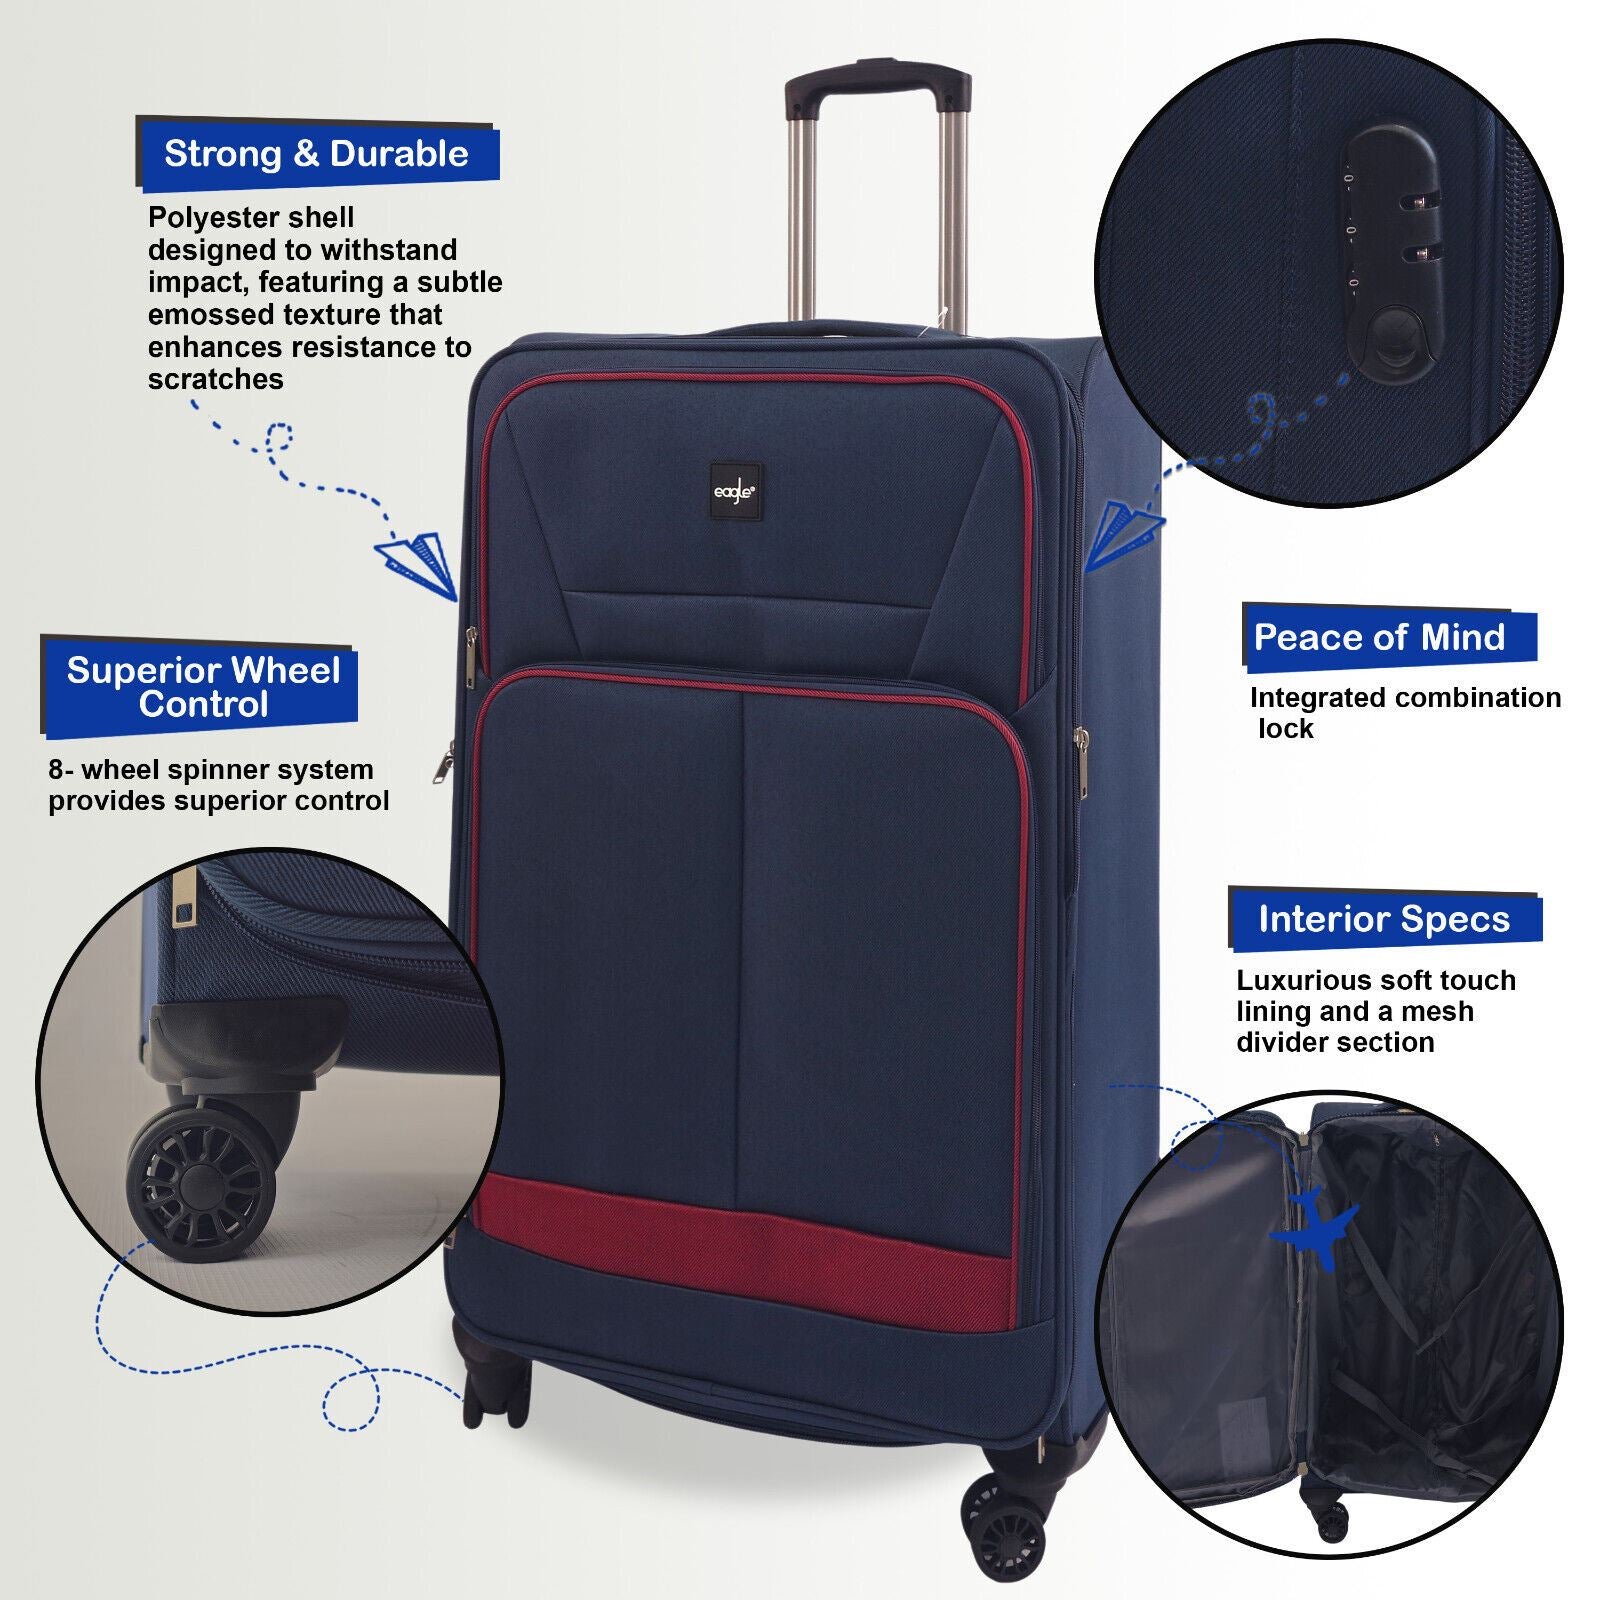 Ashford Set of 3 Soft Shell Suitcase in Navy